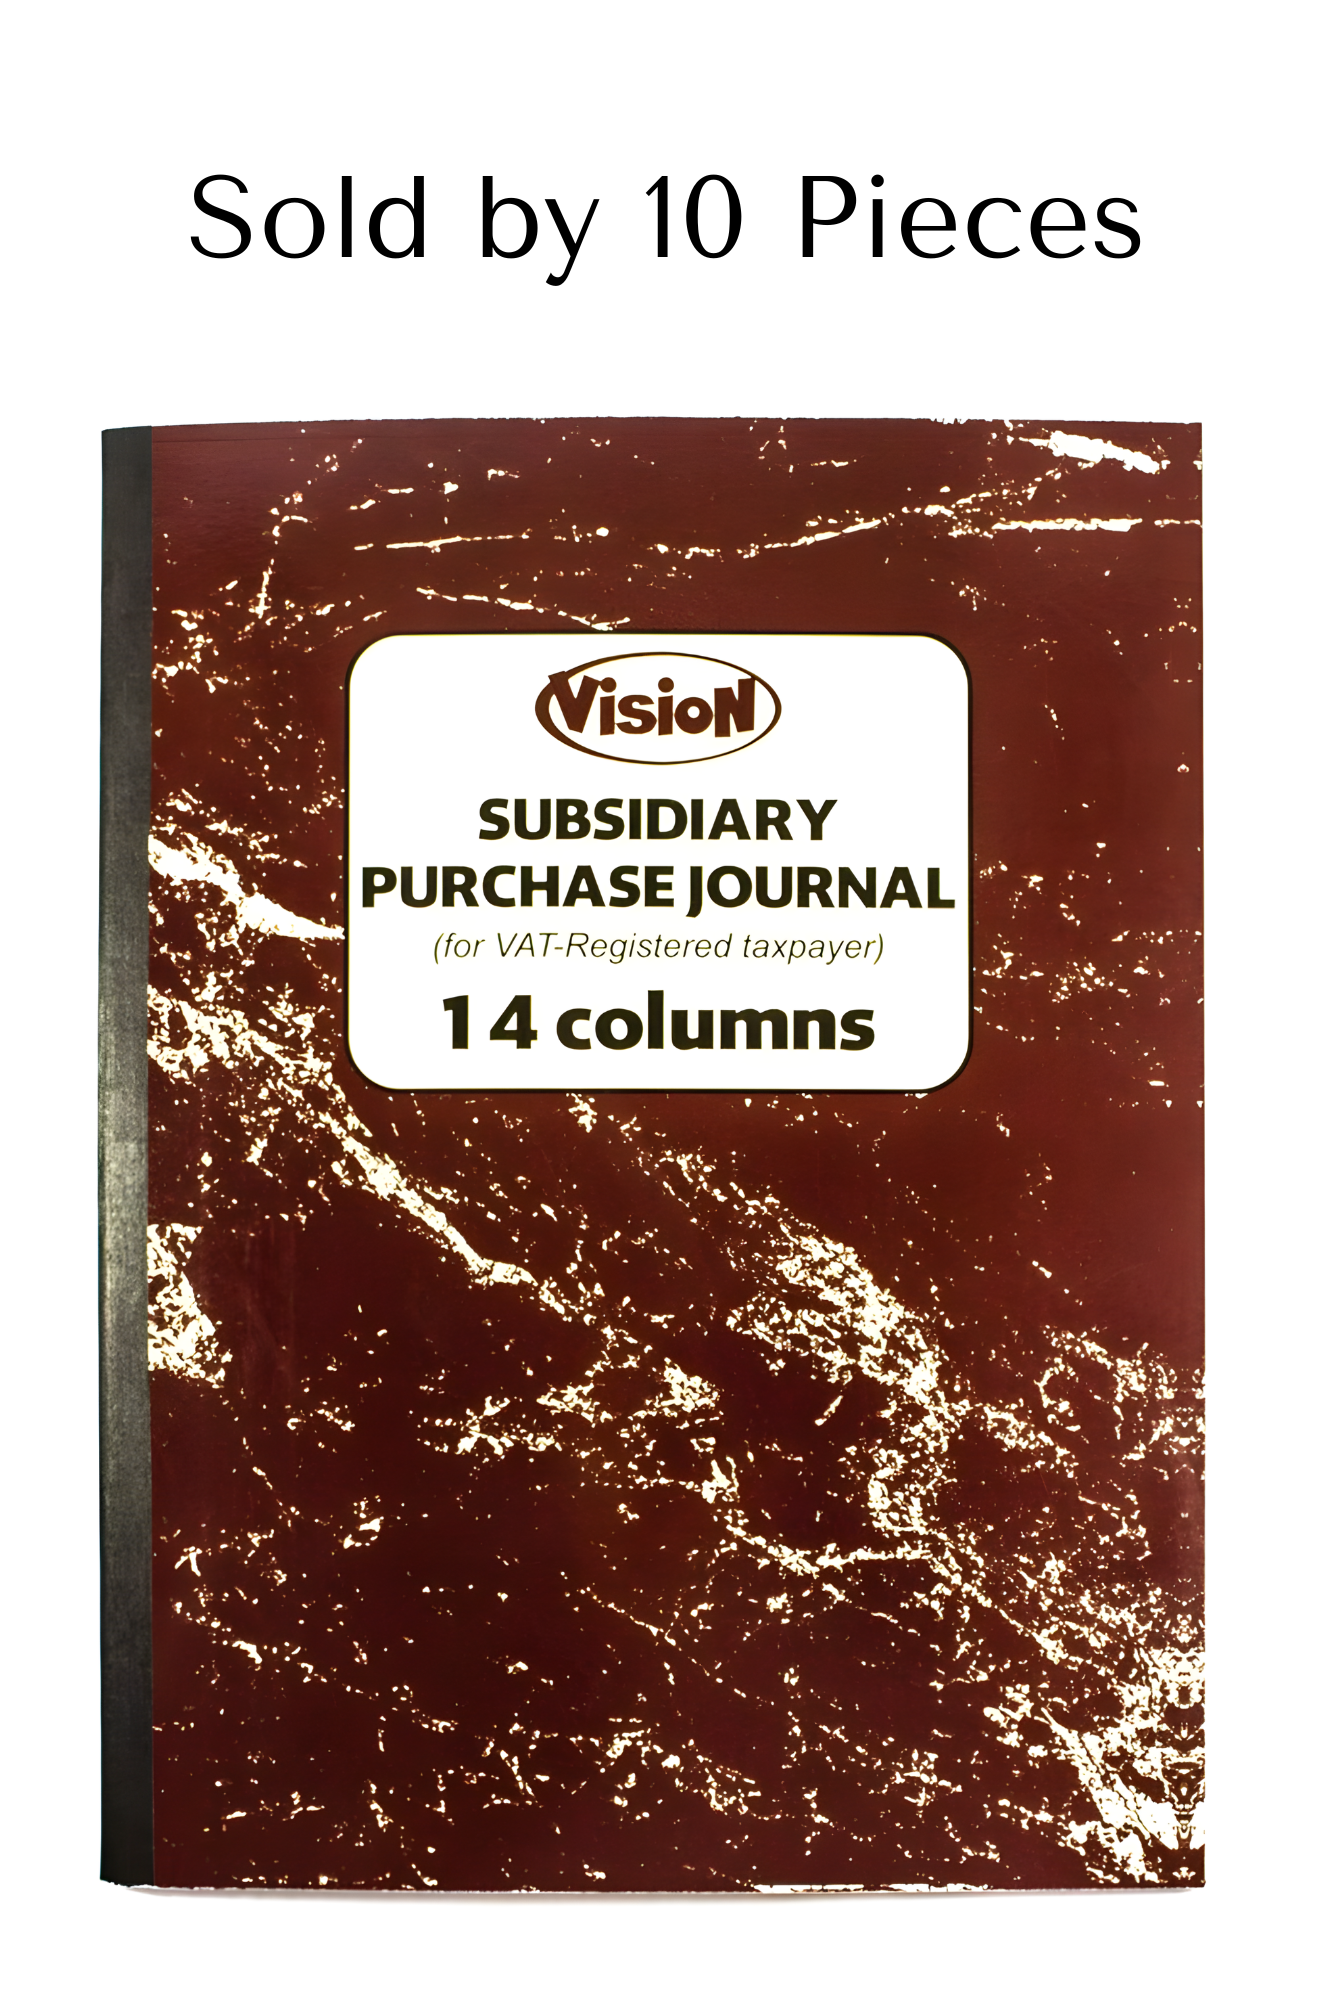 Vision Subsidiary Purchase Journal | 10pcs